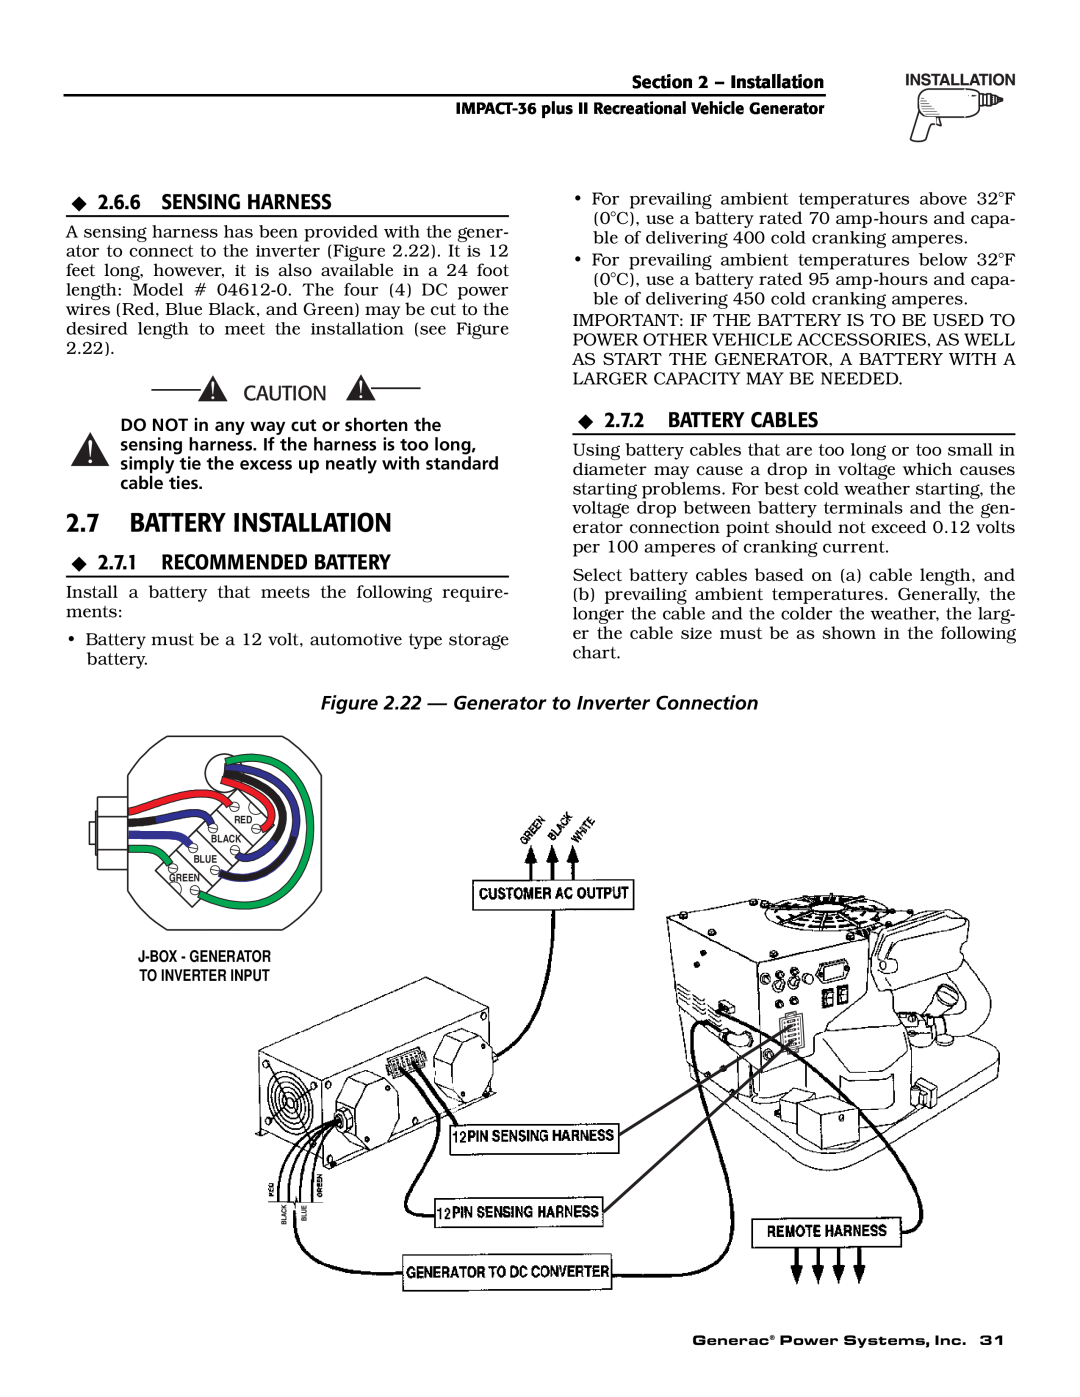 Generac 00941-3 owner manual 2.7BATTERY INSTALLATION, Sensing Harness, Recommended Battery, Battery Cables 